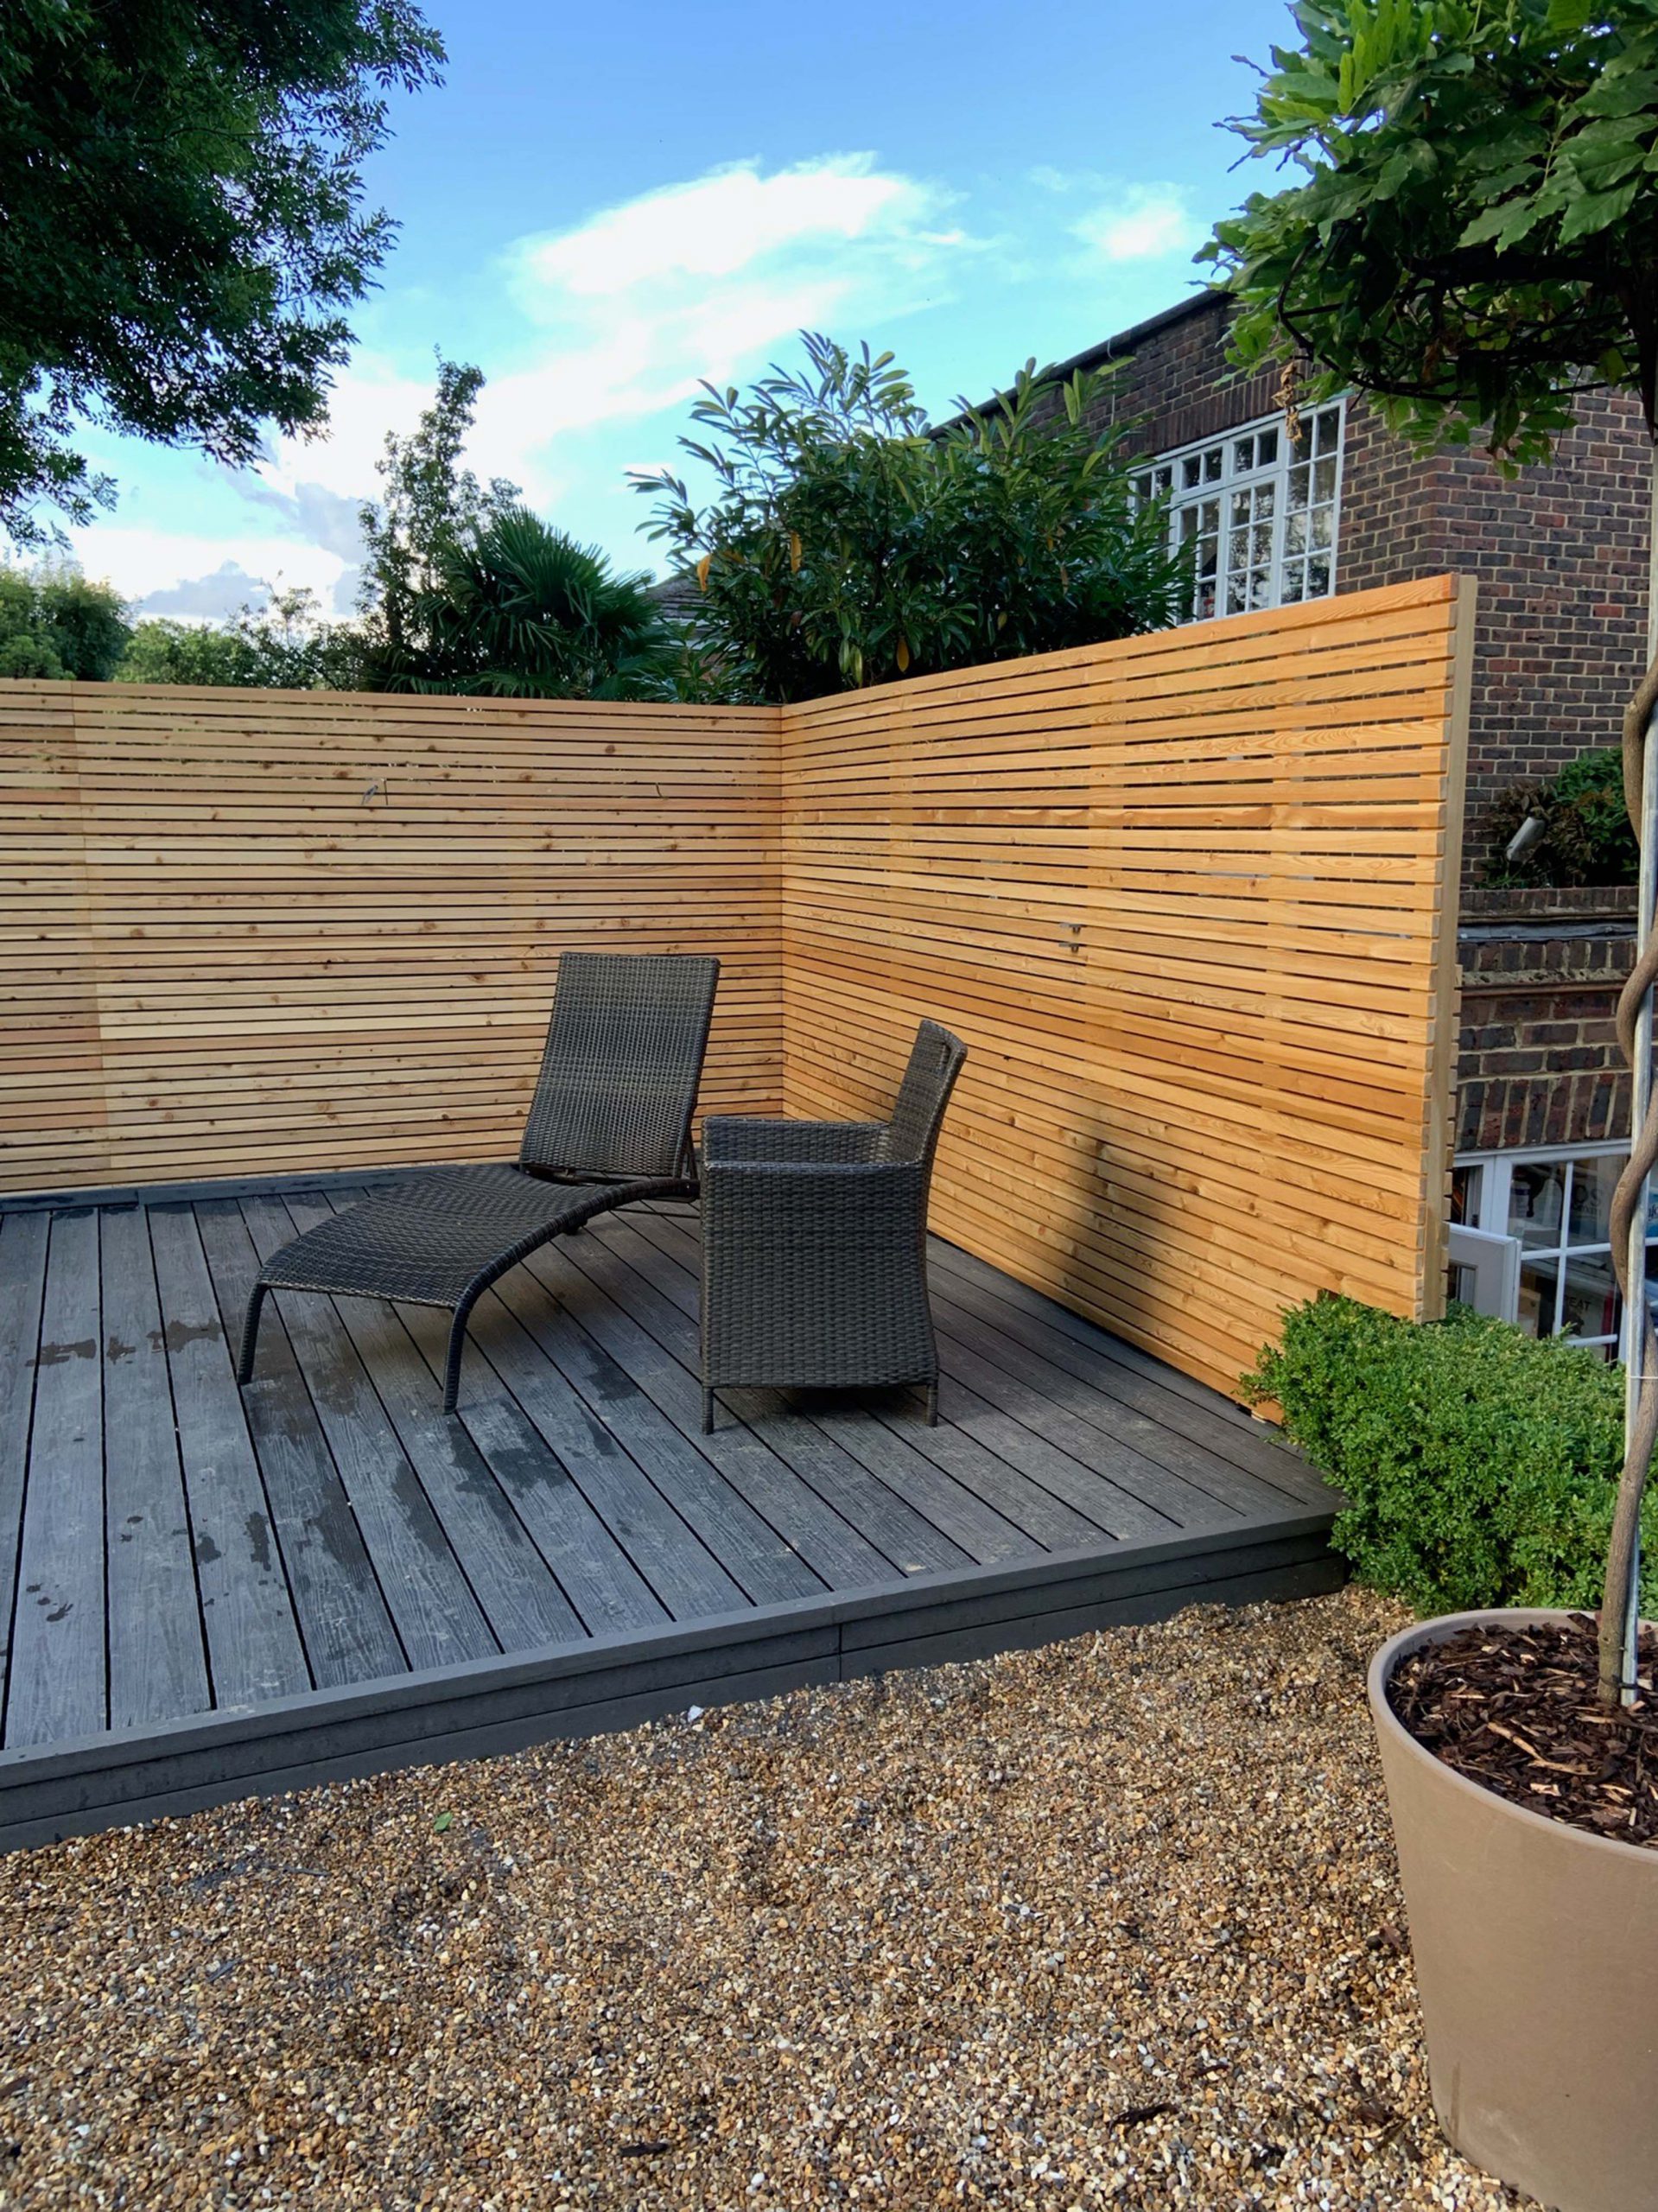 some modern black outdoor furniture sitting on a completed sustainable composite decking area